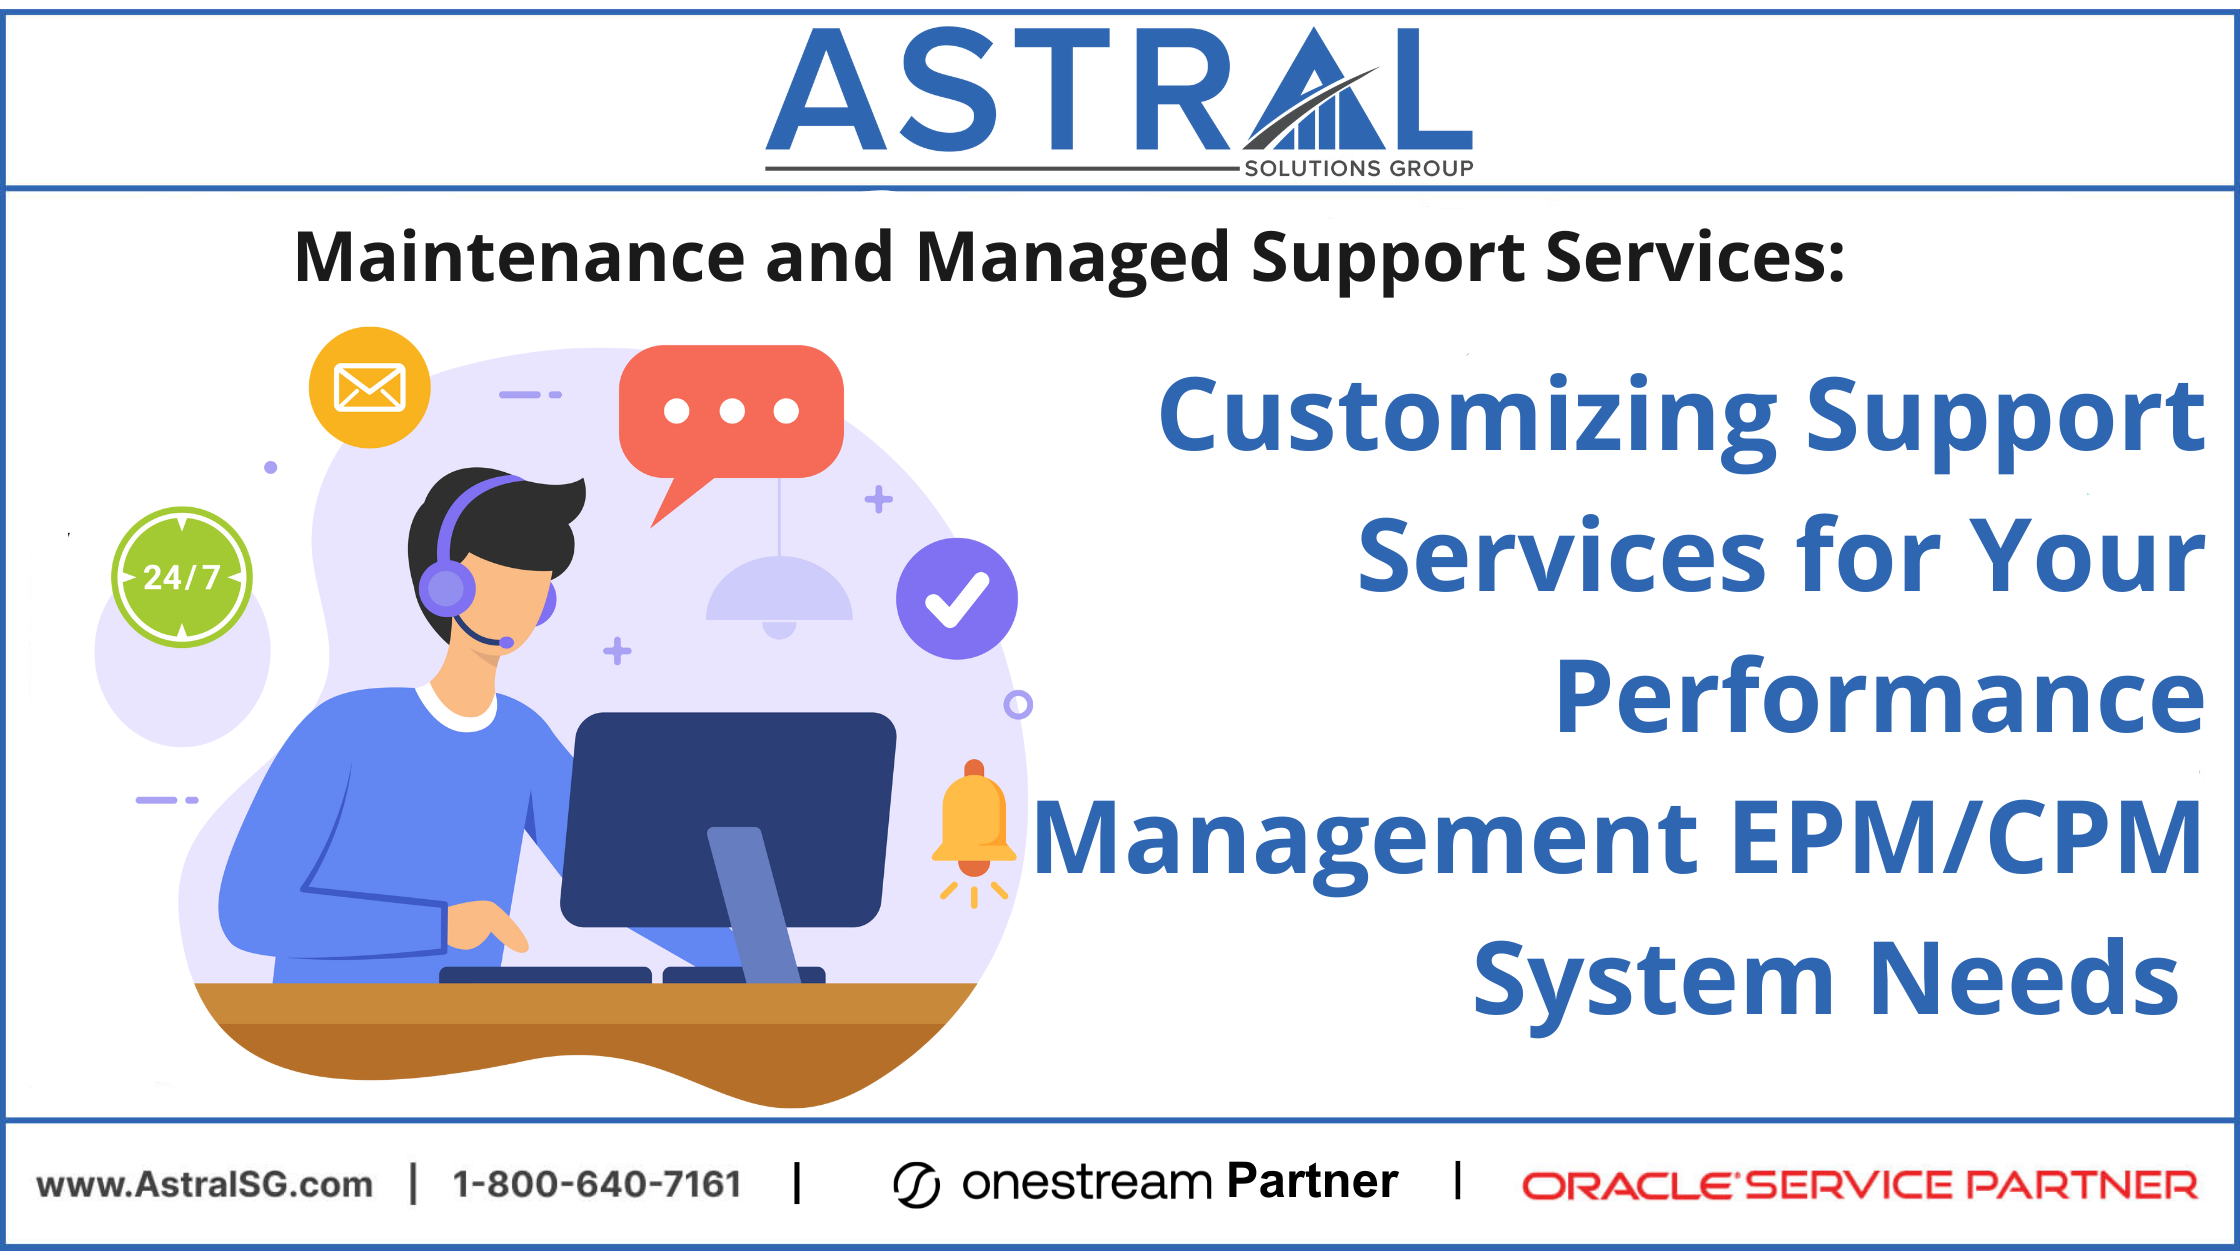 Maintenance and Managed Support Services: Customizing Support Services for Your Performance Management EPM/CPM Needs